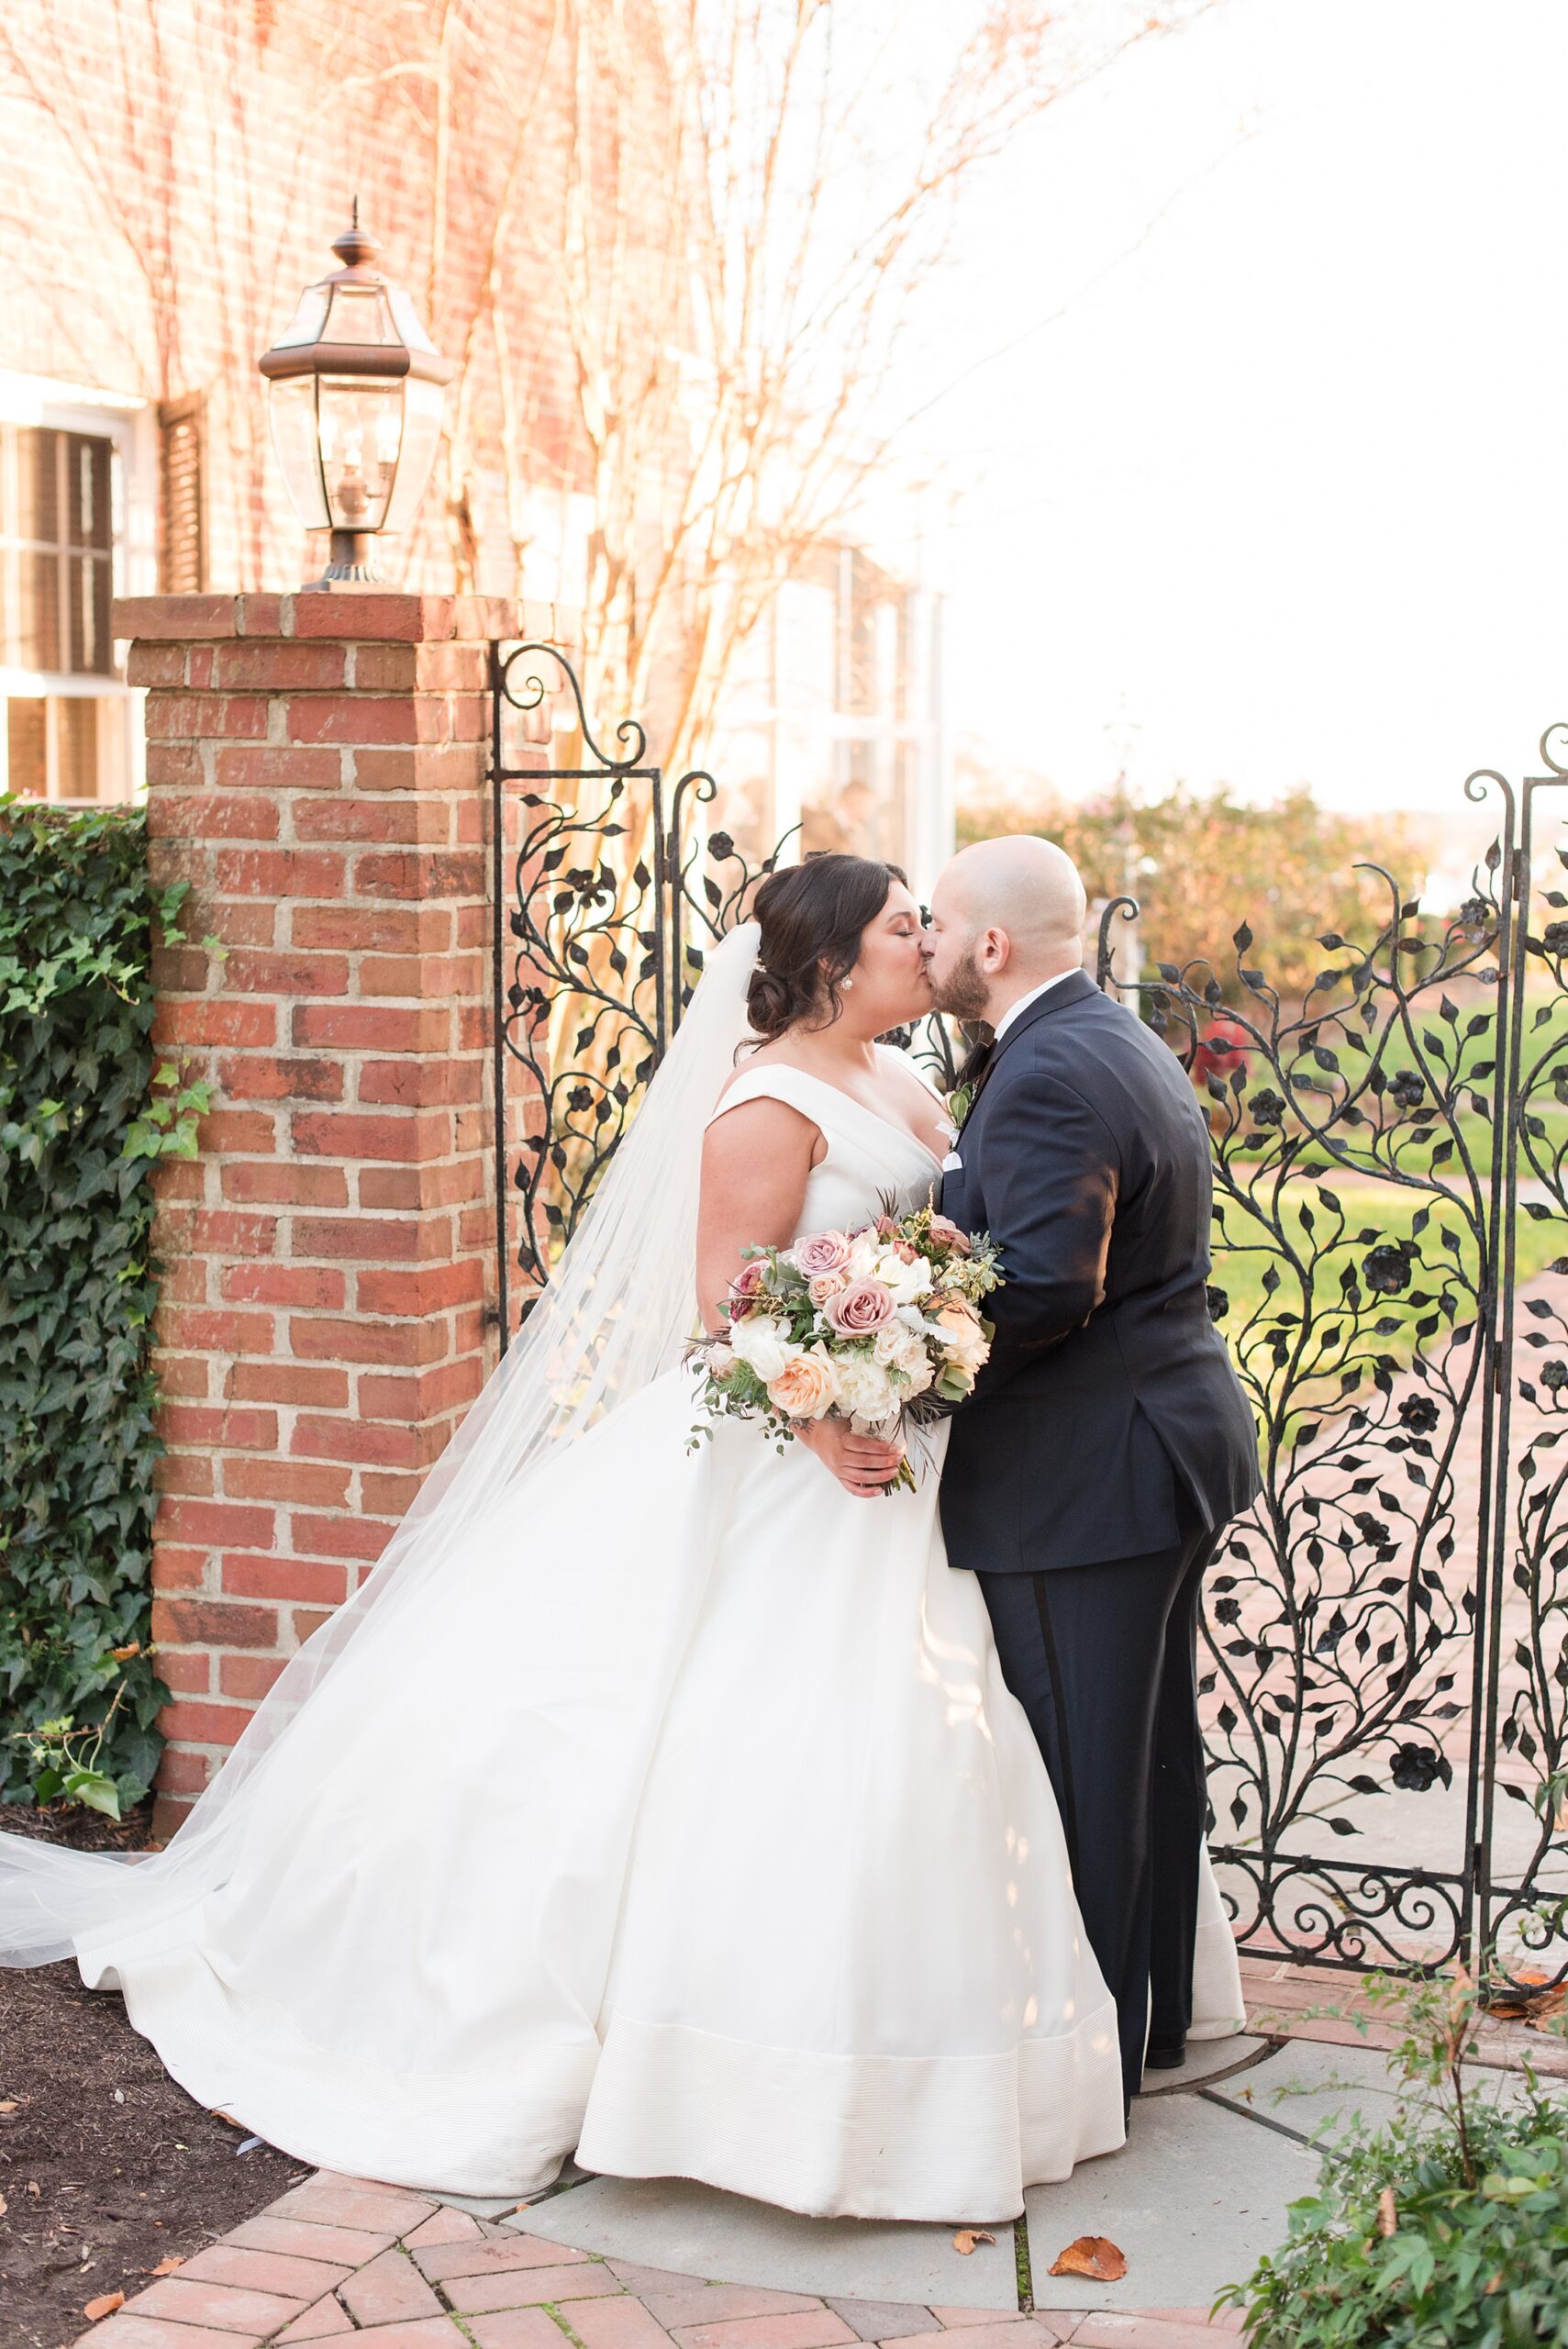 Newlyweds kiss while standing in a garden gate at sunset during their Brittland Estates Wedding